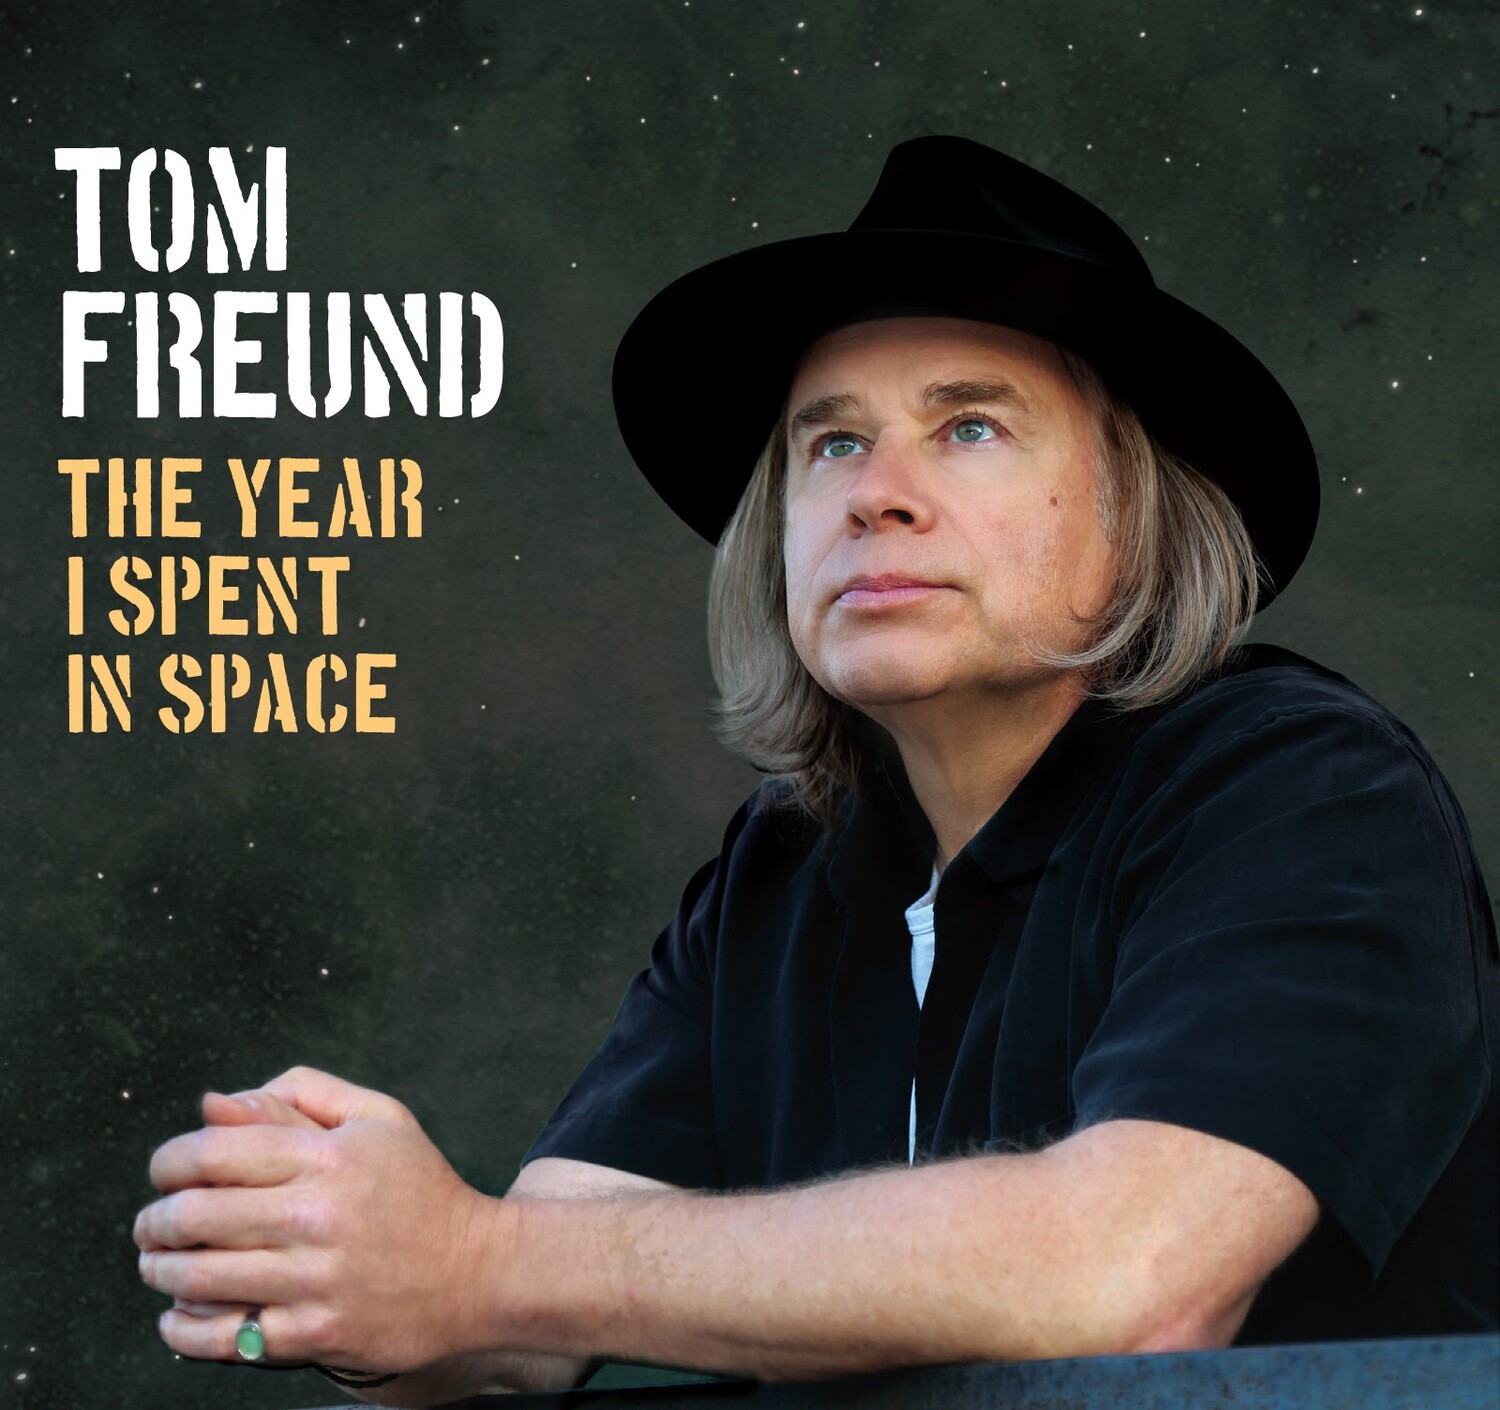 The Year I Spent in Space CD